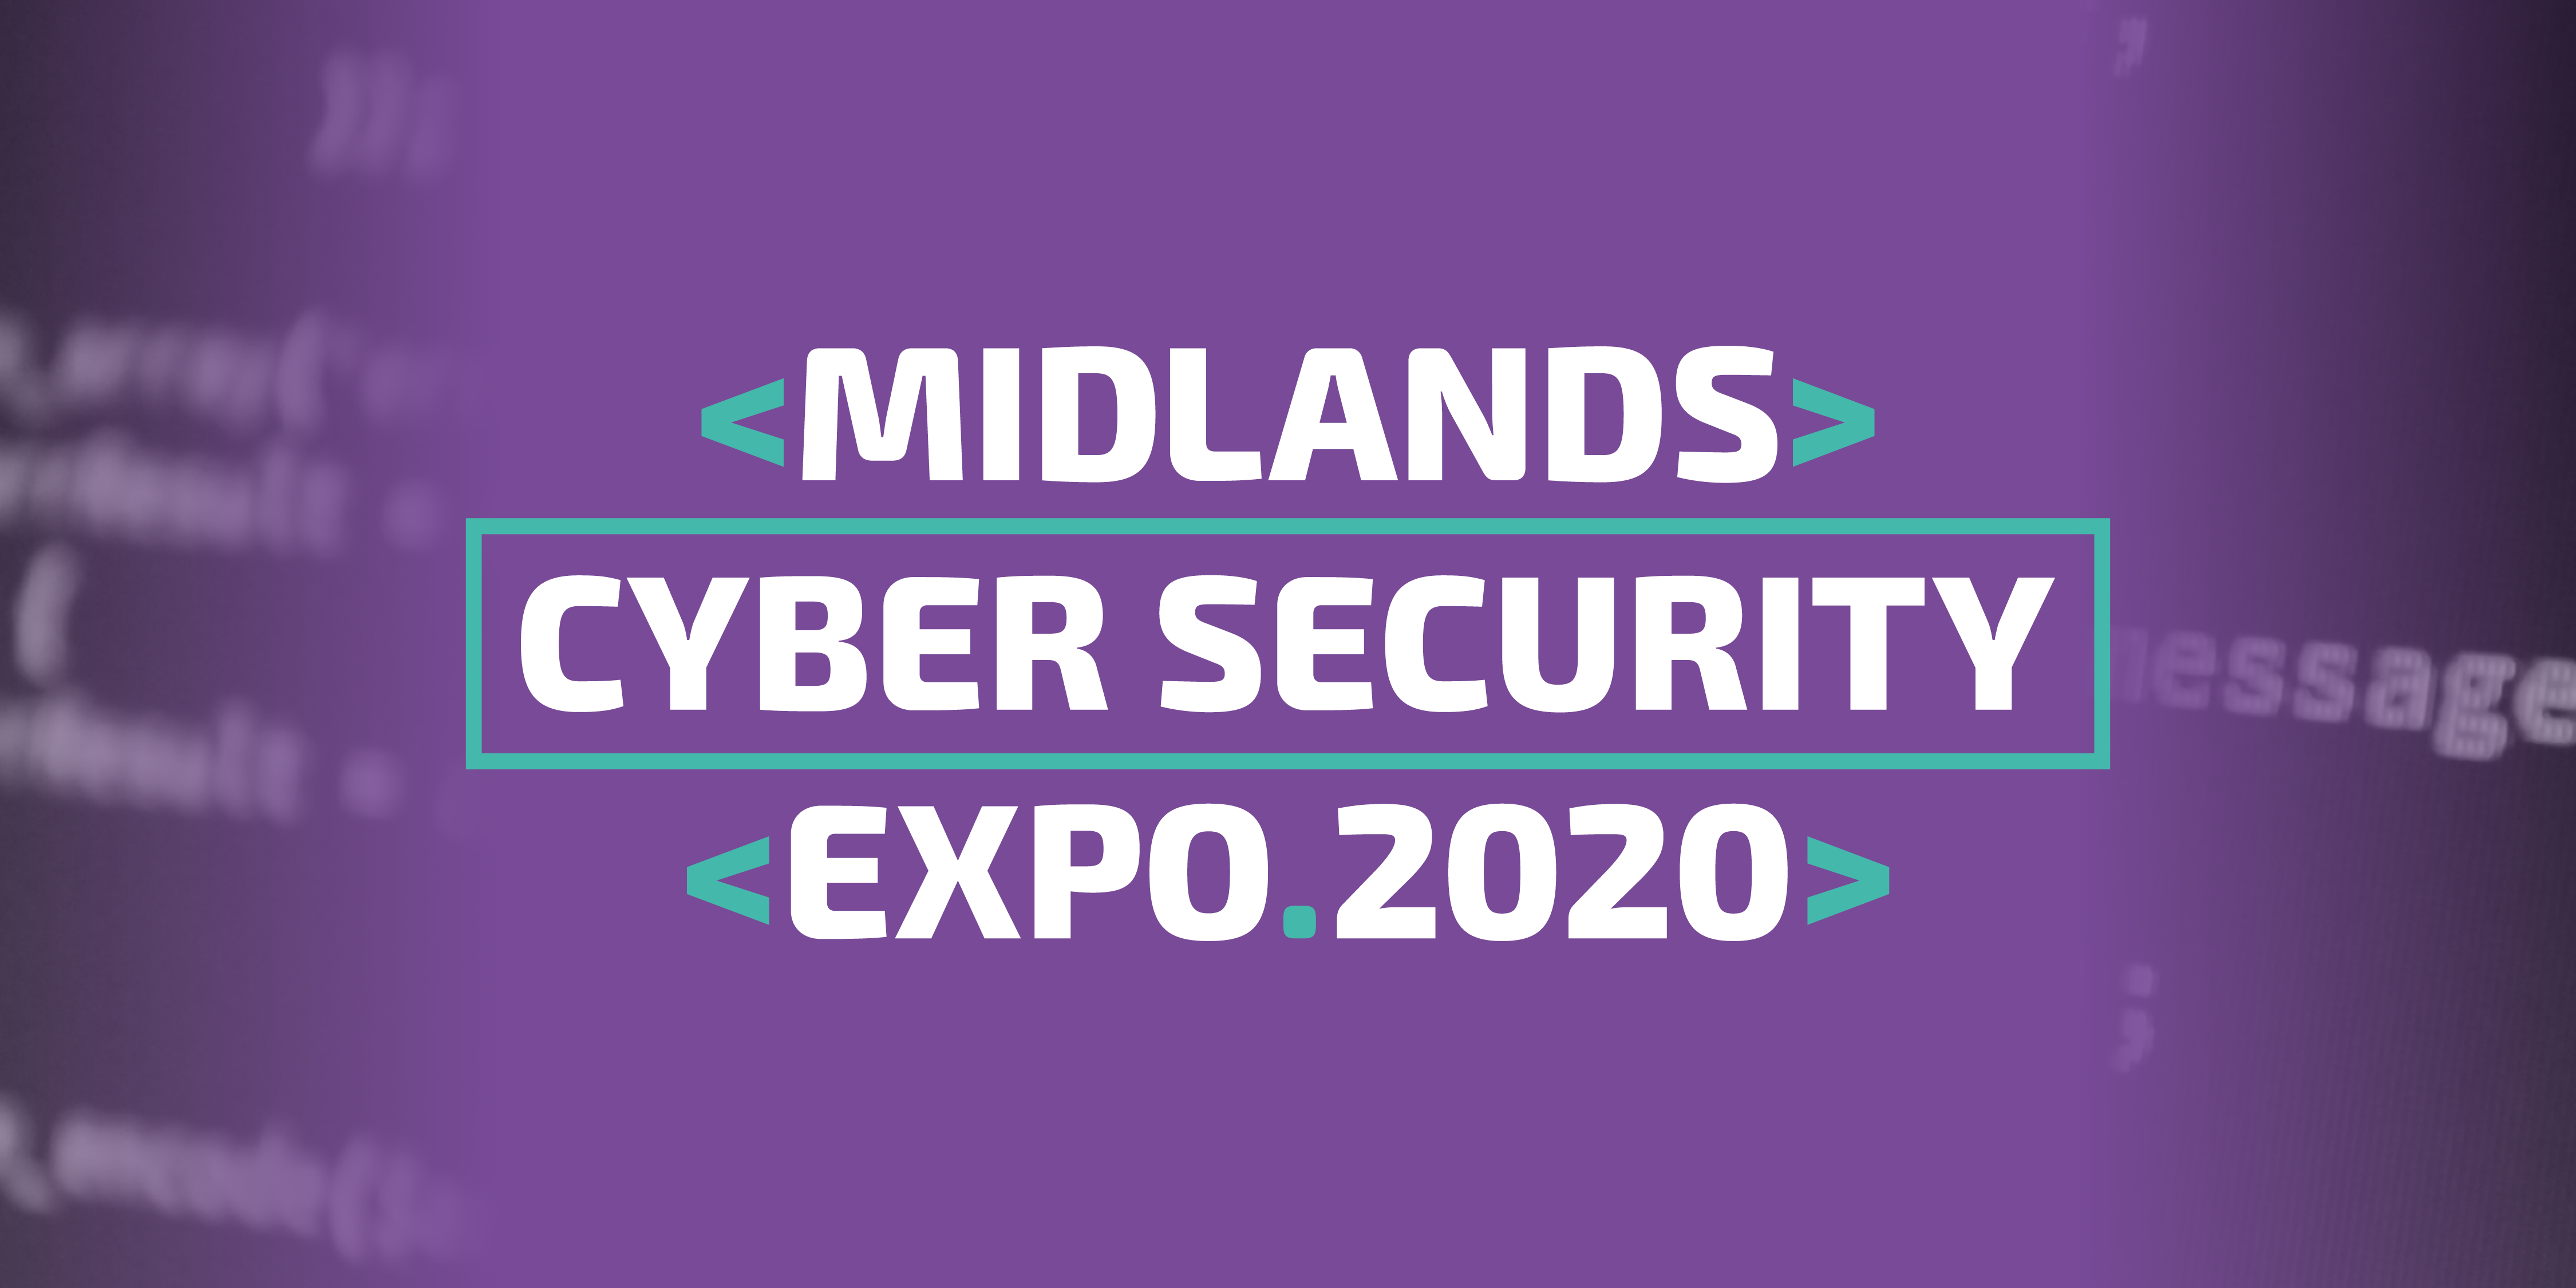 Midlands Cyber Security Expo 2020